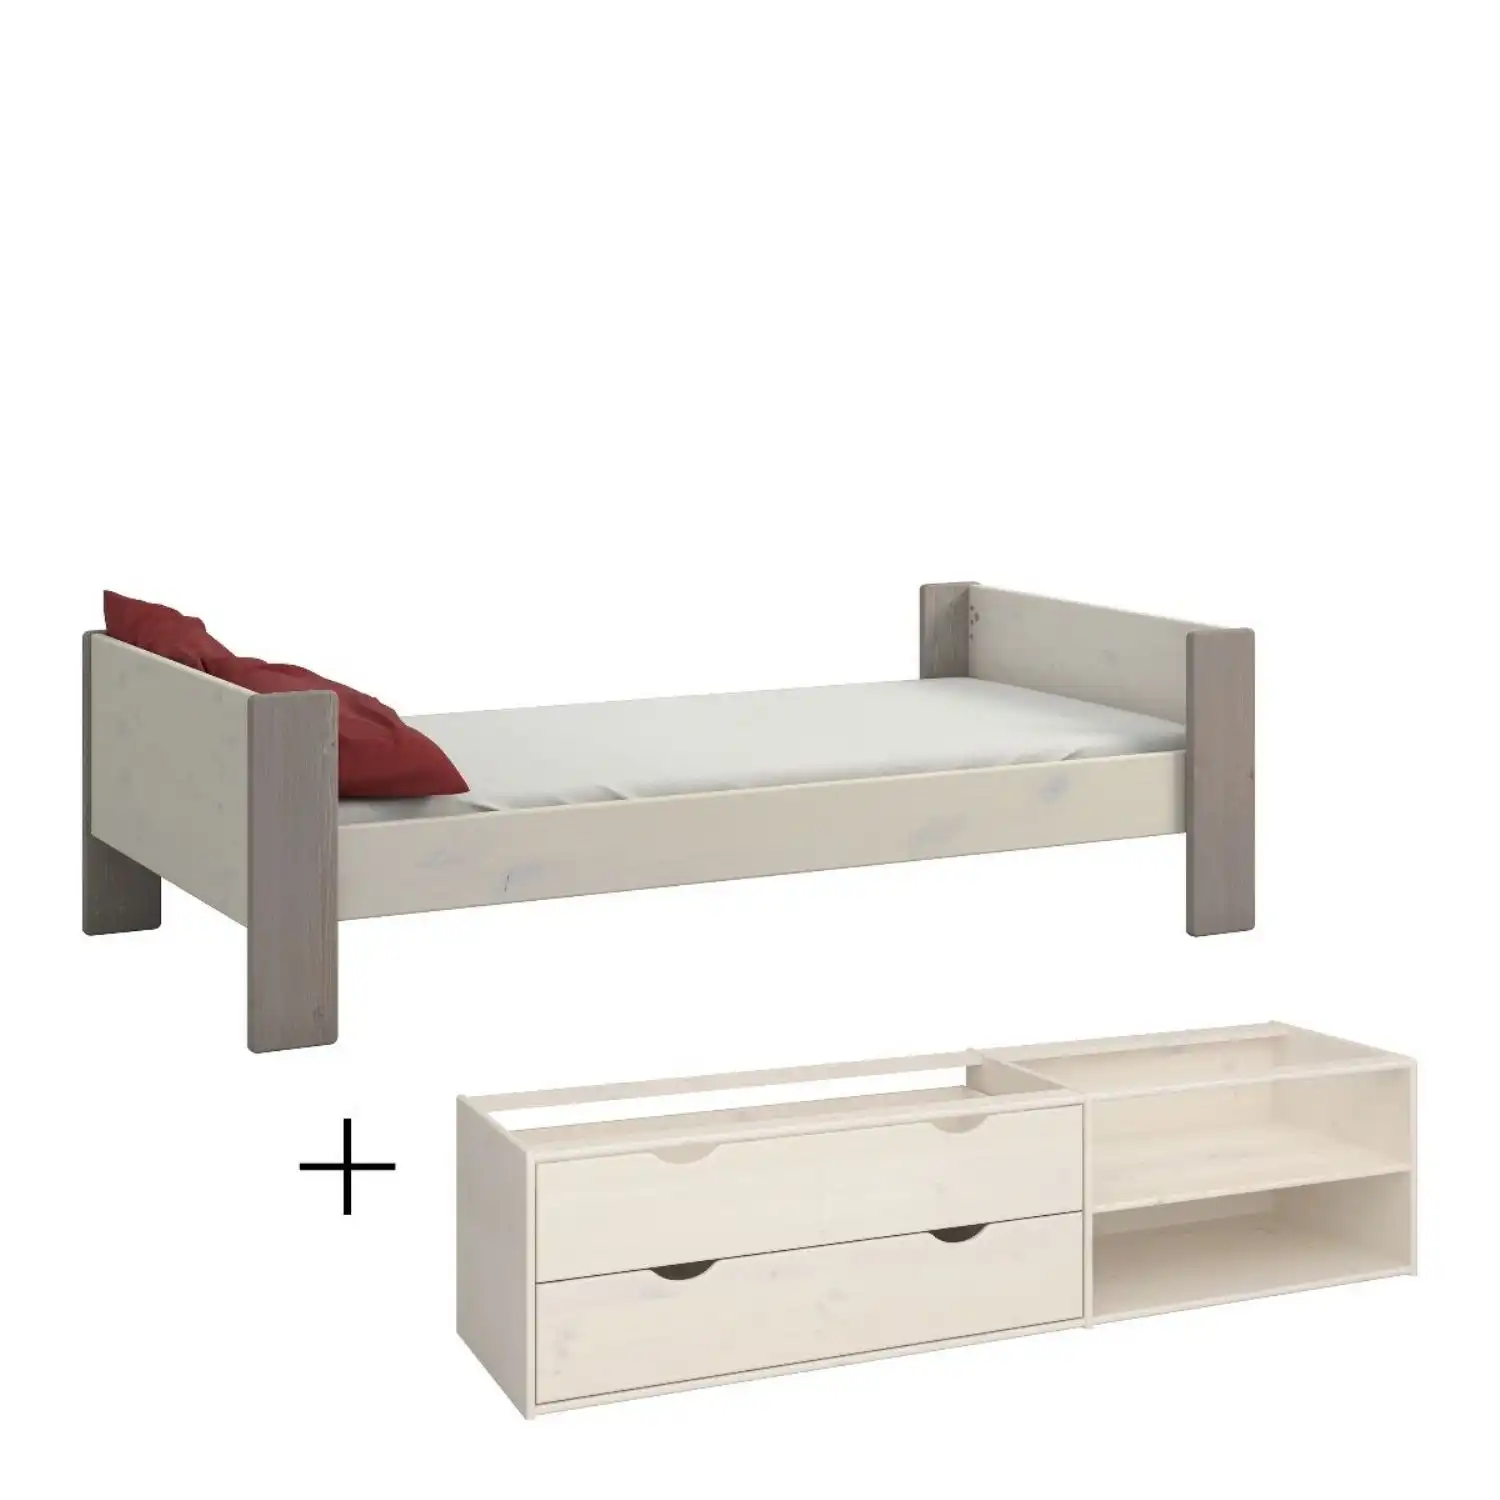 Steens For Kids Single Bed Incl. Under Bed Drawers in Two Tone